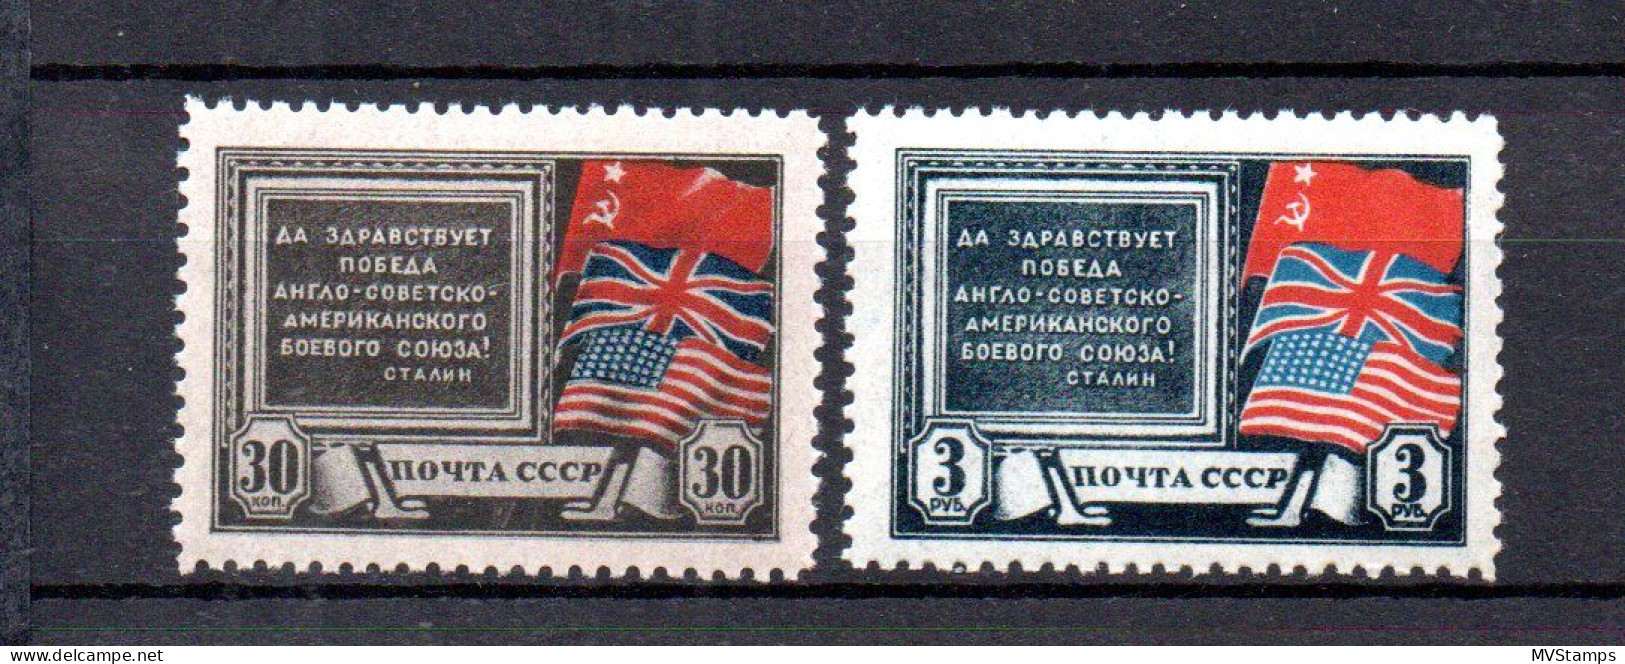 Russia 1943 Old Set Flags/Teheran Conference Stamps (Michel 890/91) MNH - Unused Stamps